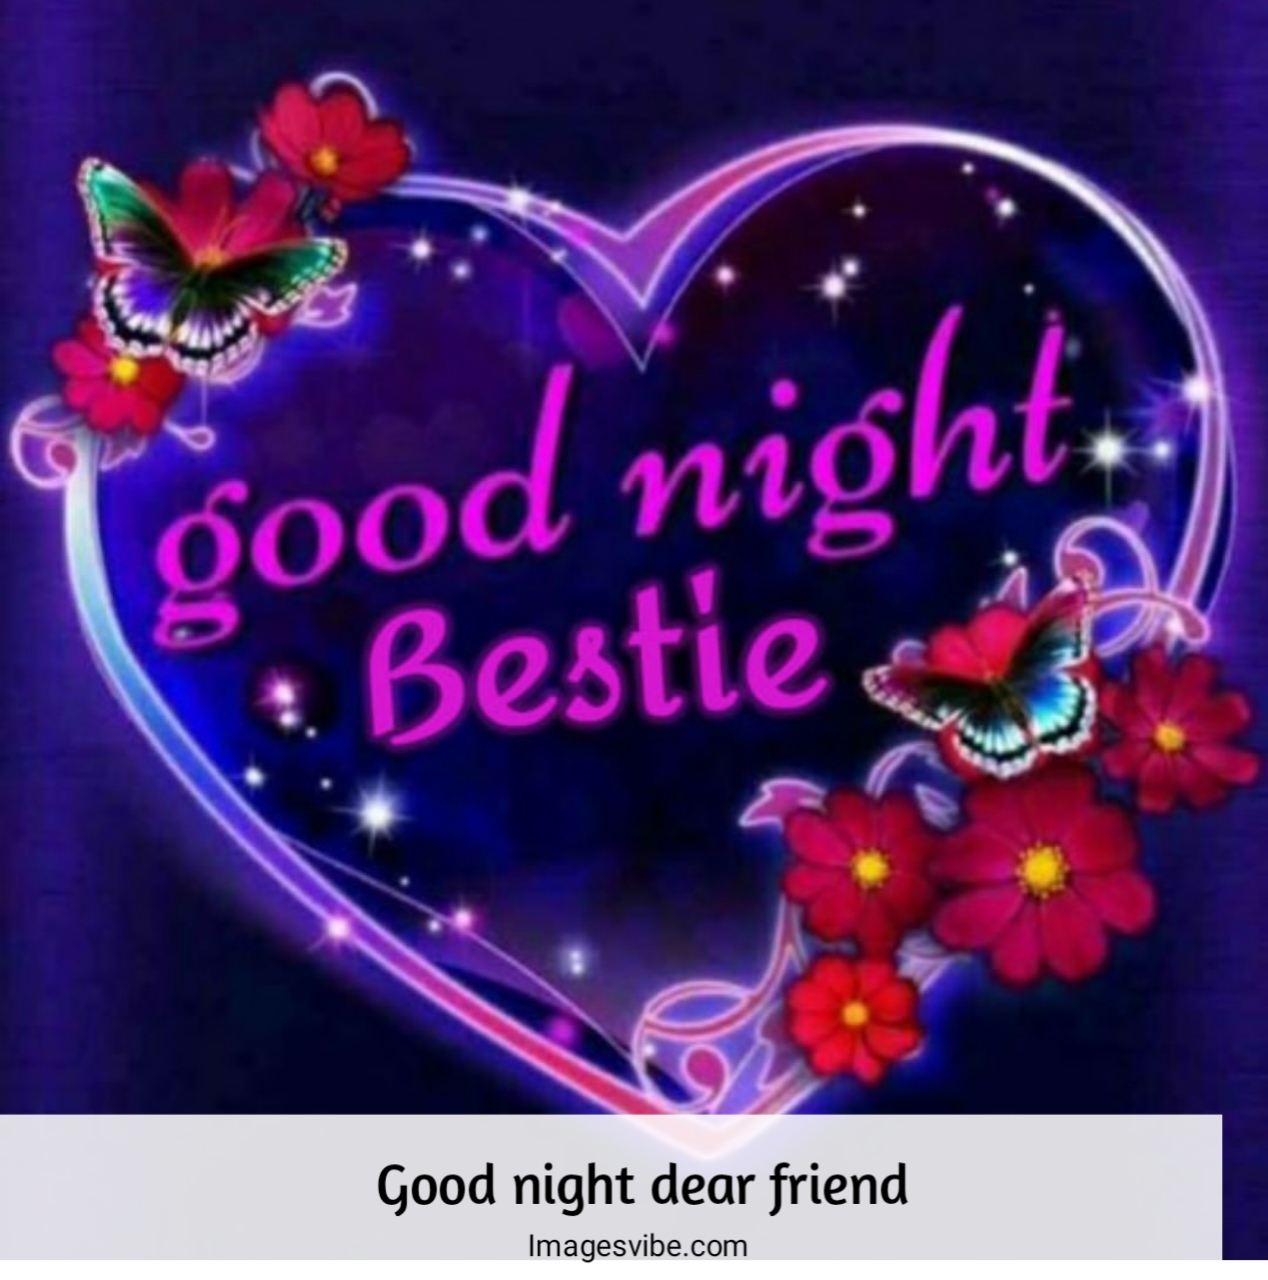 Best 30+Good Night Wishes Images Download in 2023 - Images Vibe